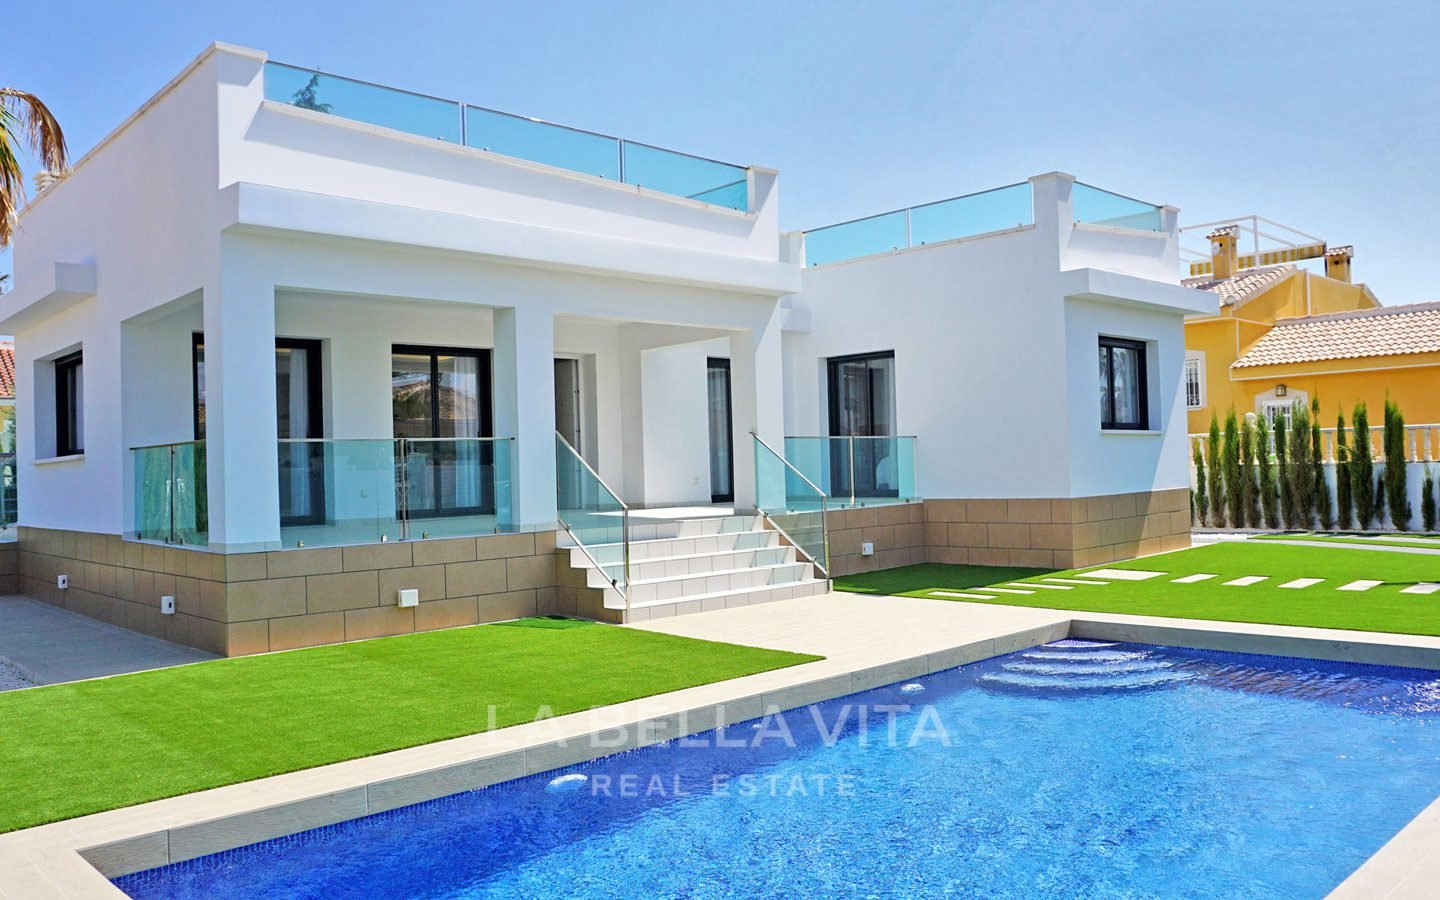 Modern, detached single-family Villa for sale in Quesada, Spain. Private Swimming Pool.